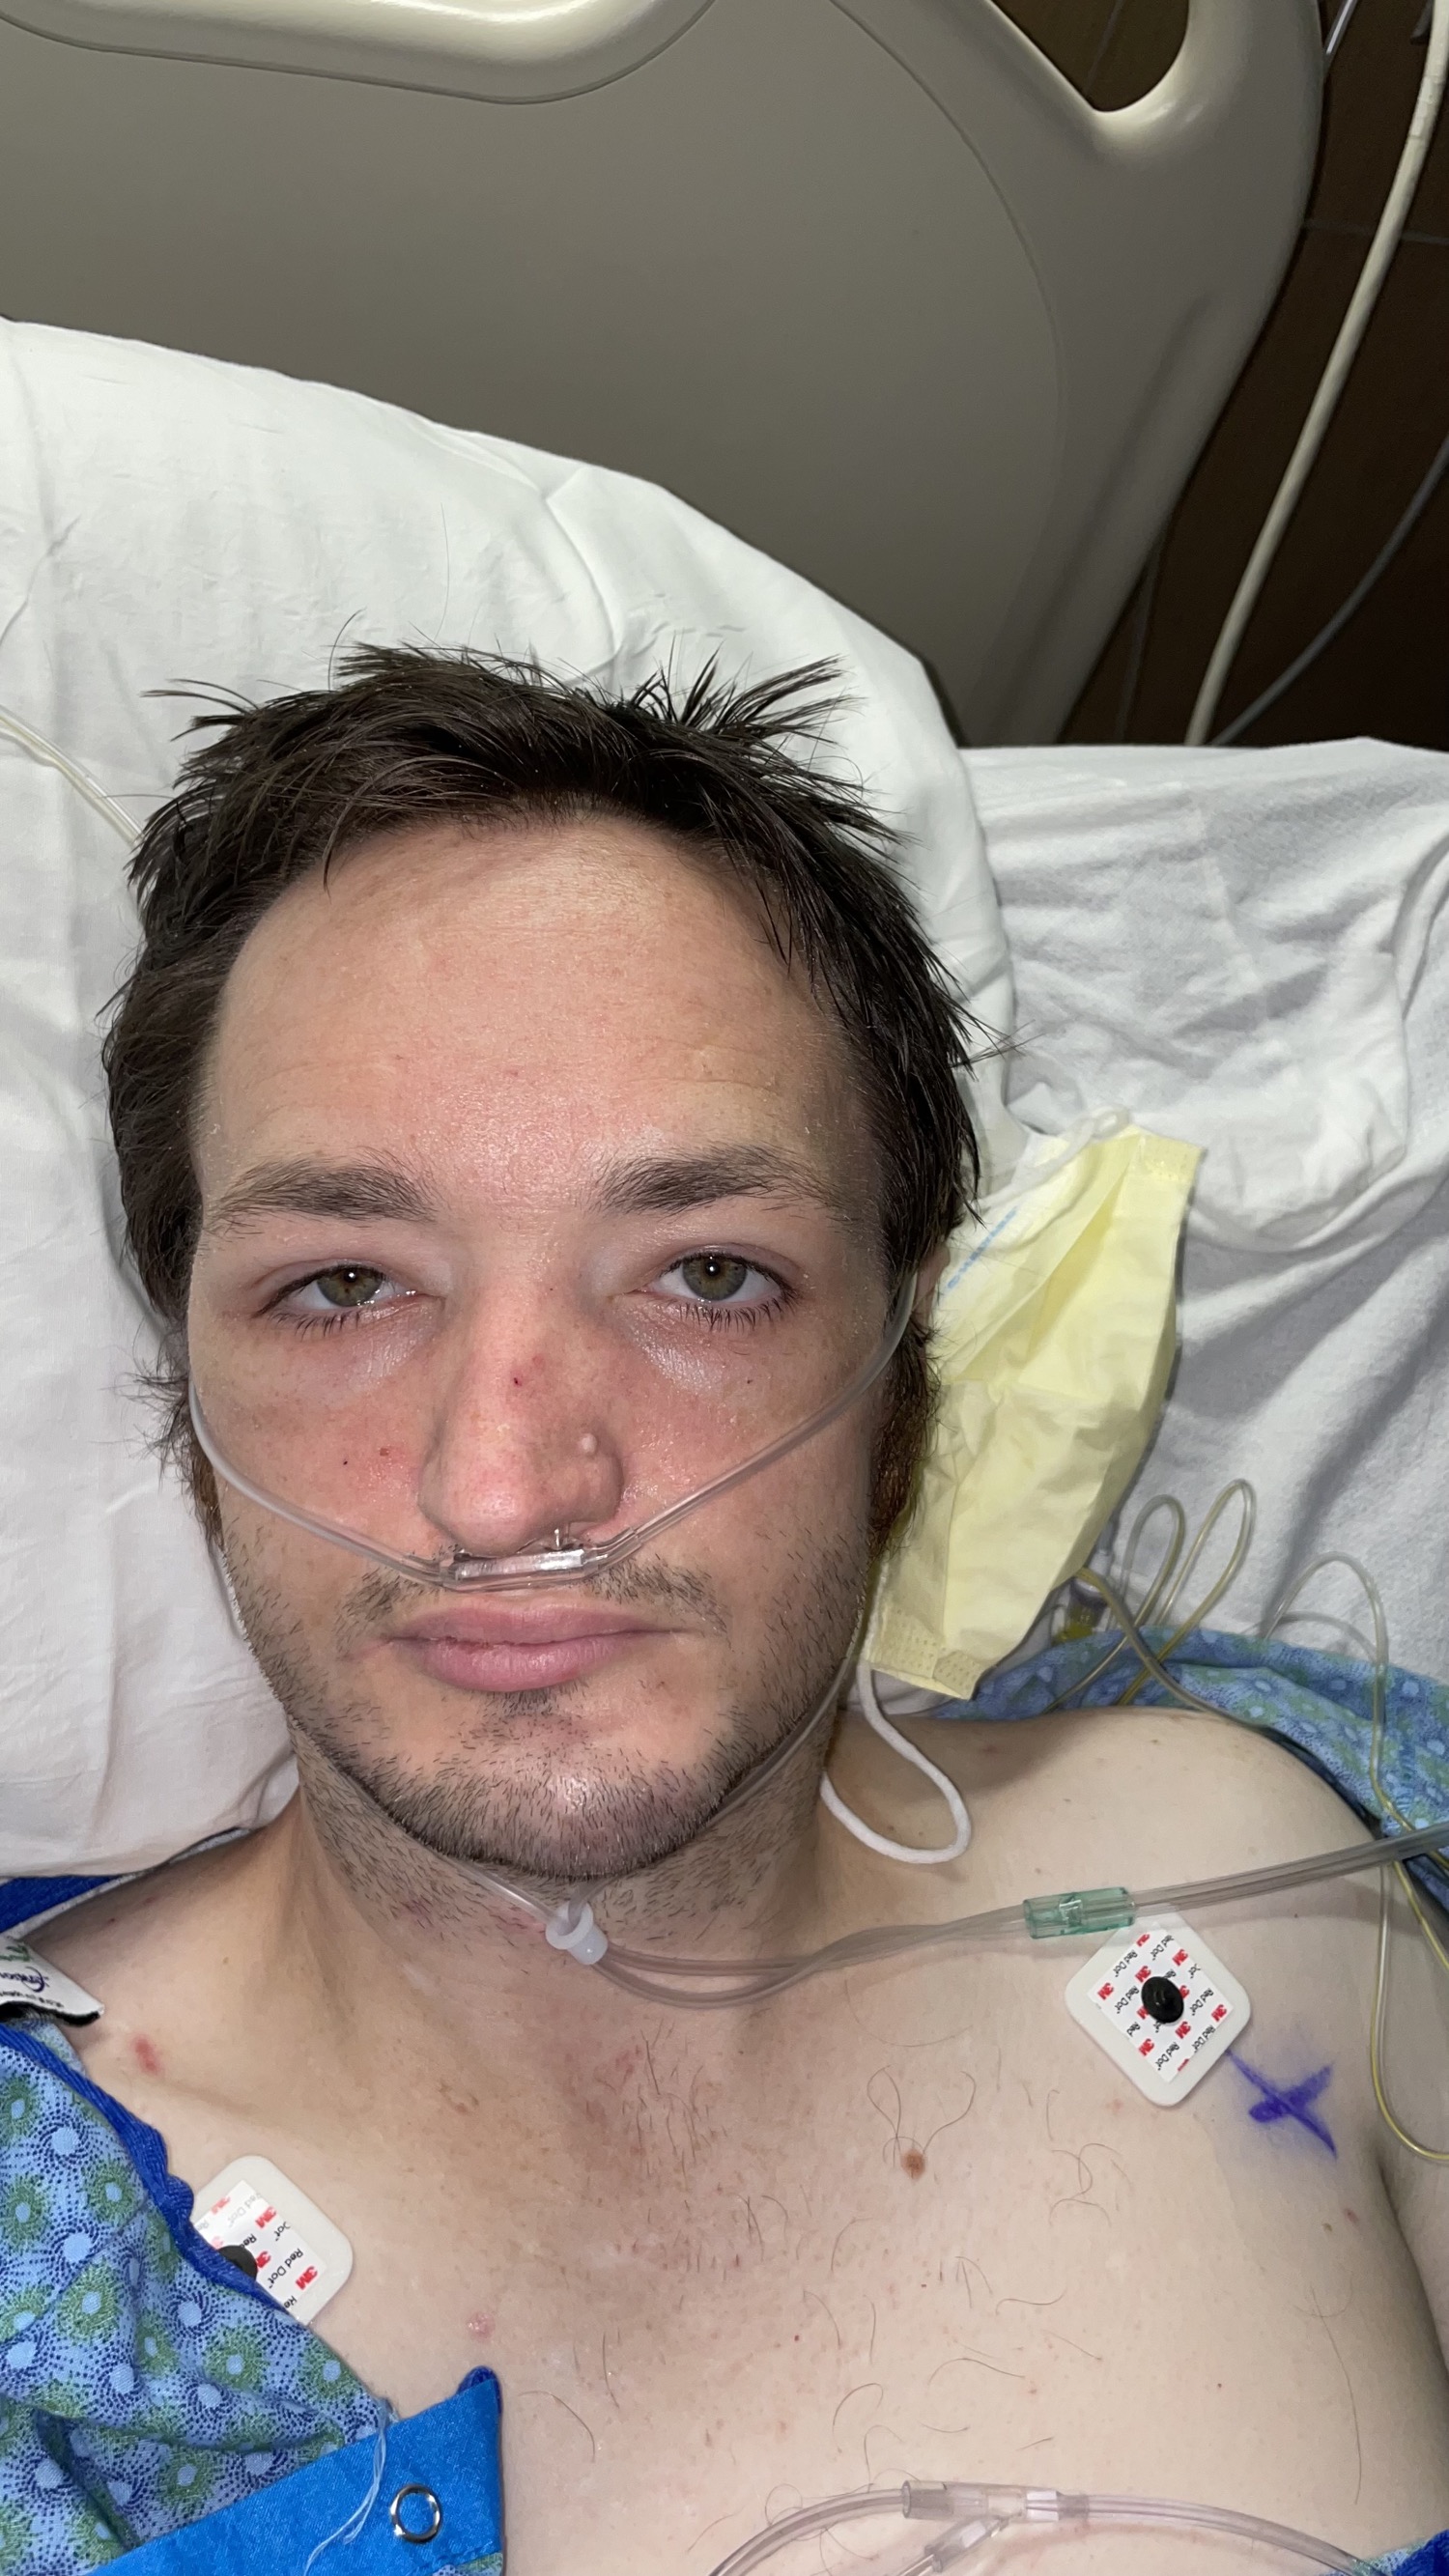 A Mini-Post Update (a residual complication; second surgery)